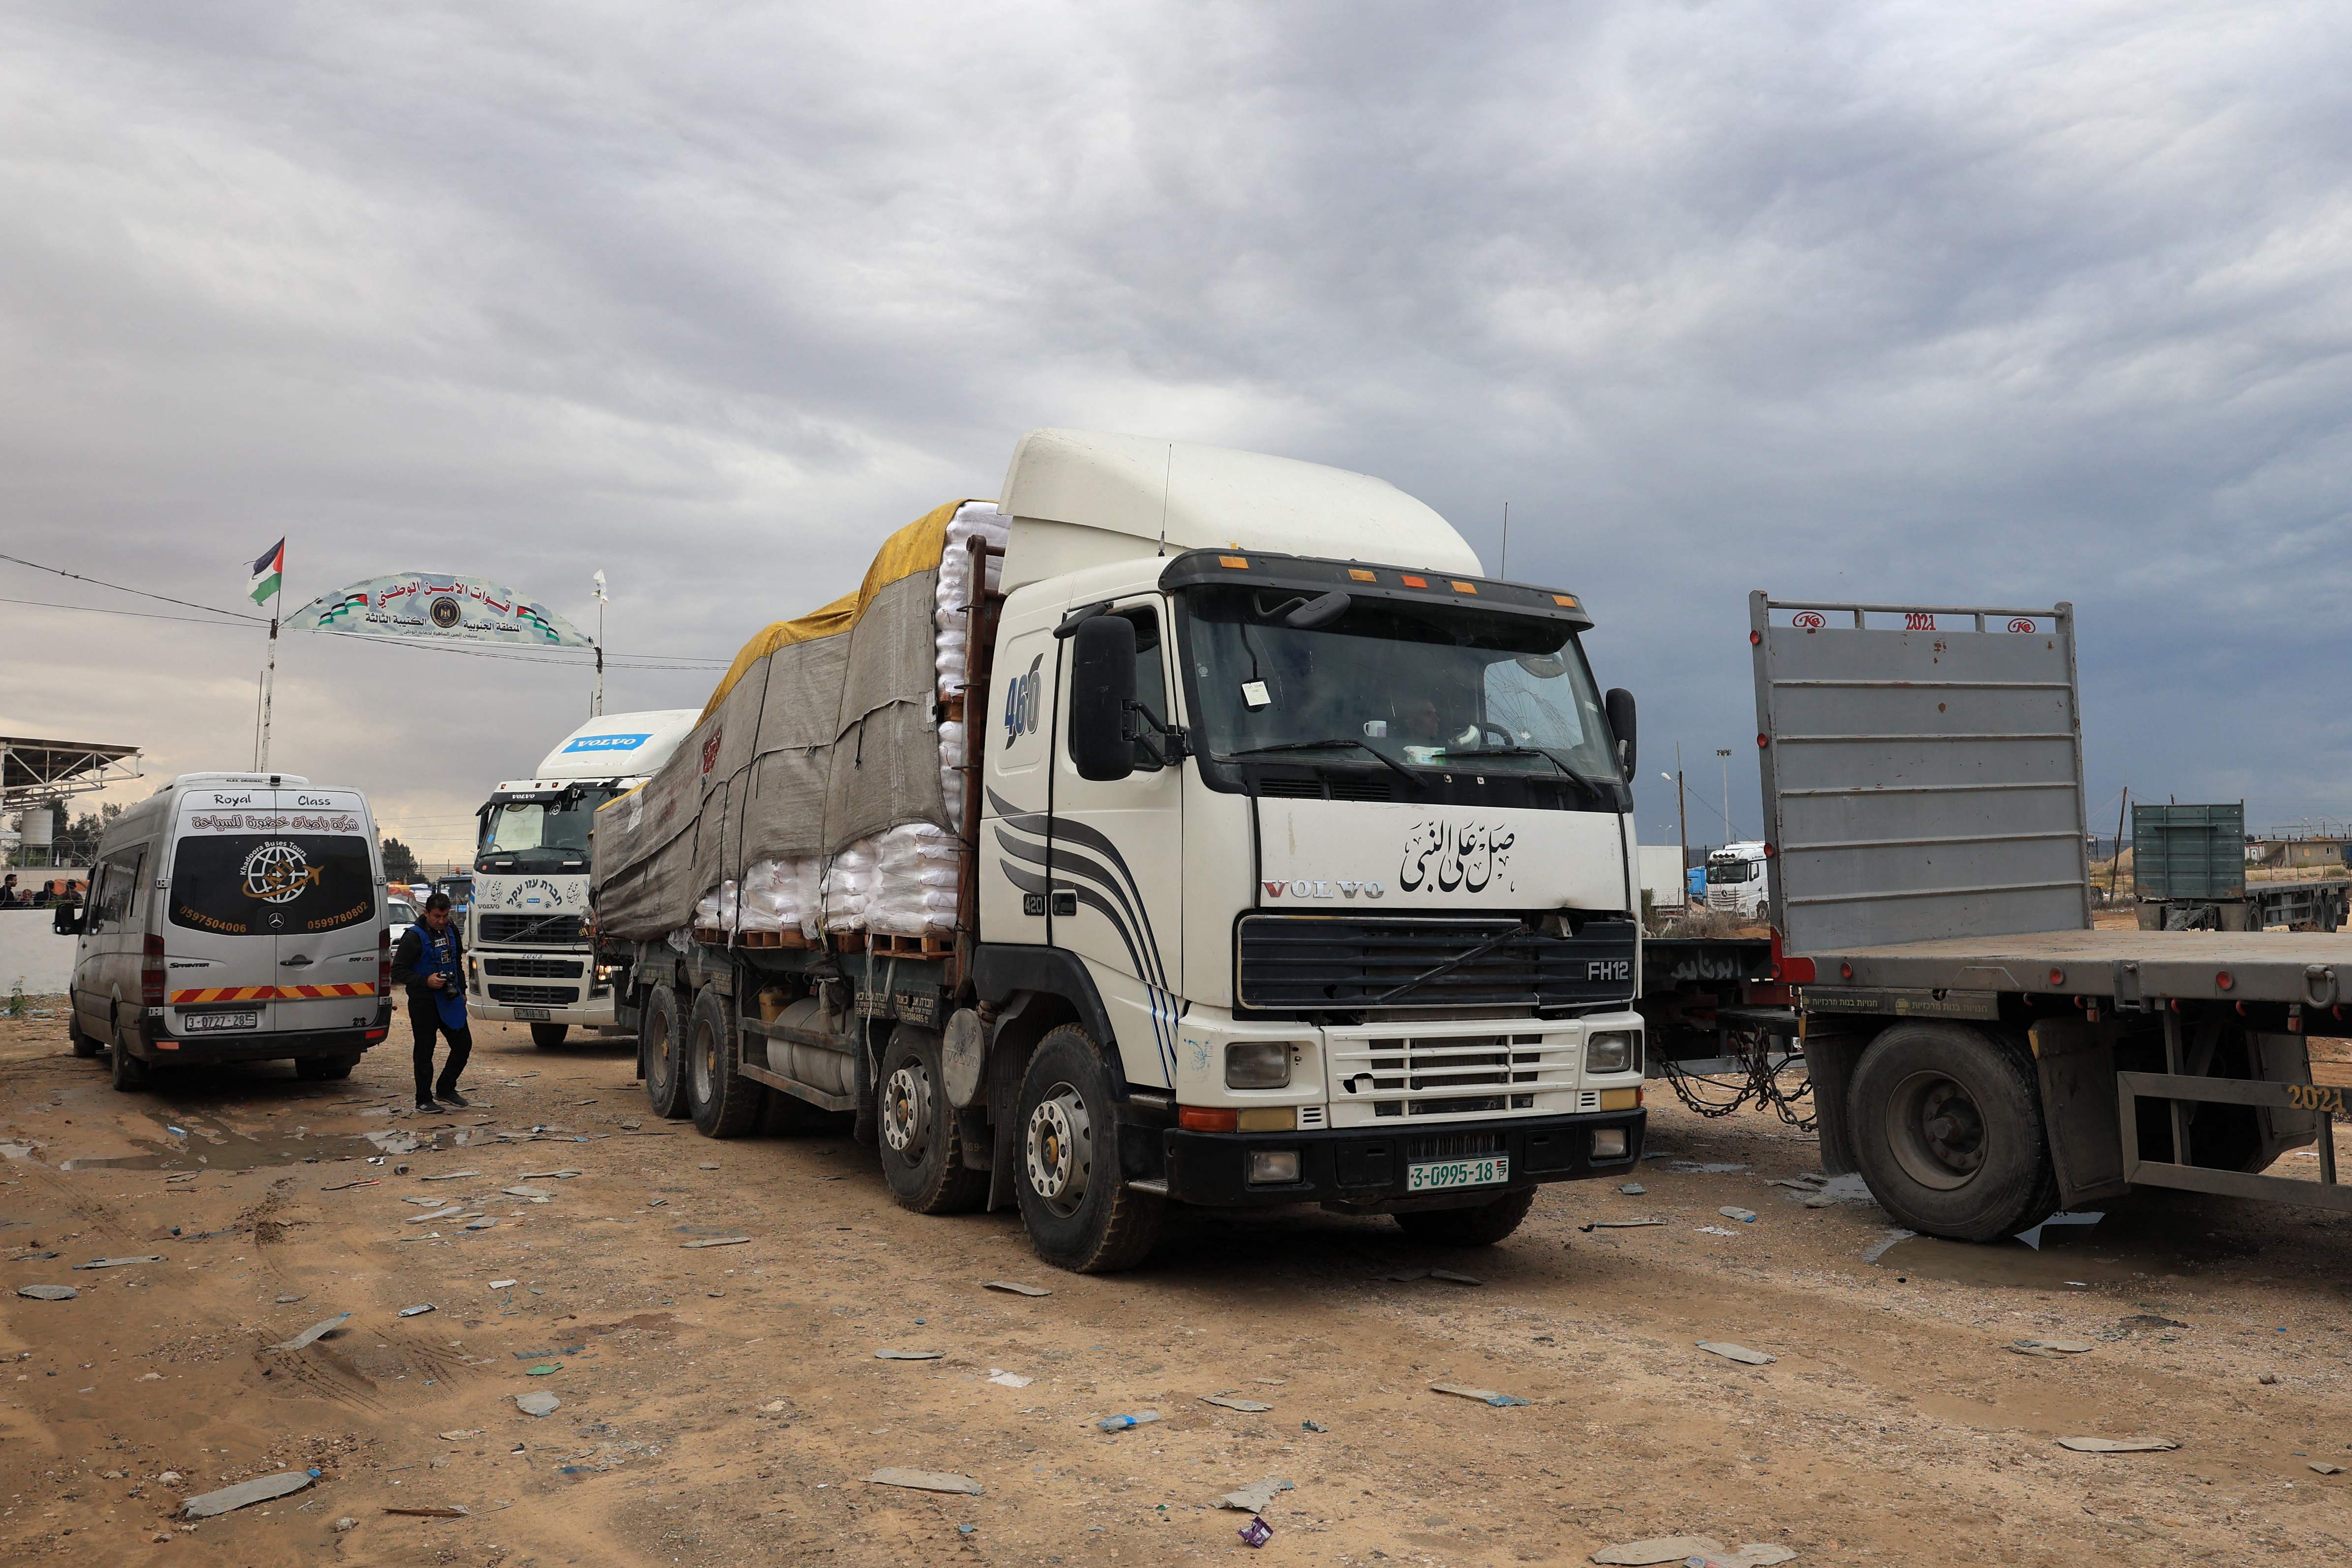 Of the 1,129 aid trucks that entered Gaza since the opening of the Rafah border crossing with Egypt last month, only 447 carried food, according to the WFP